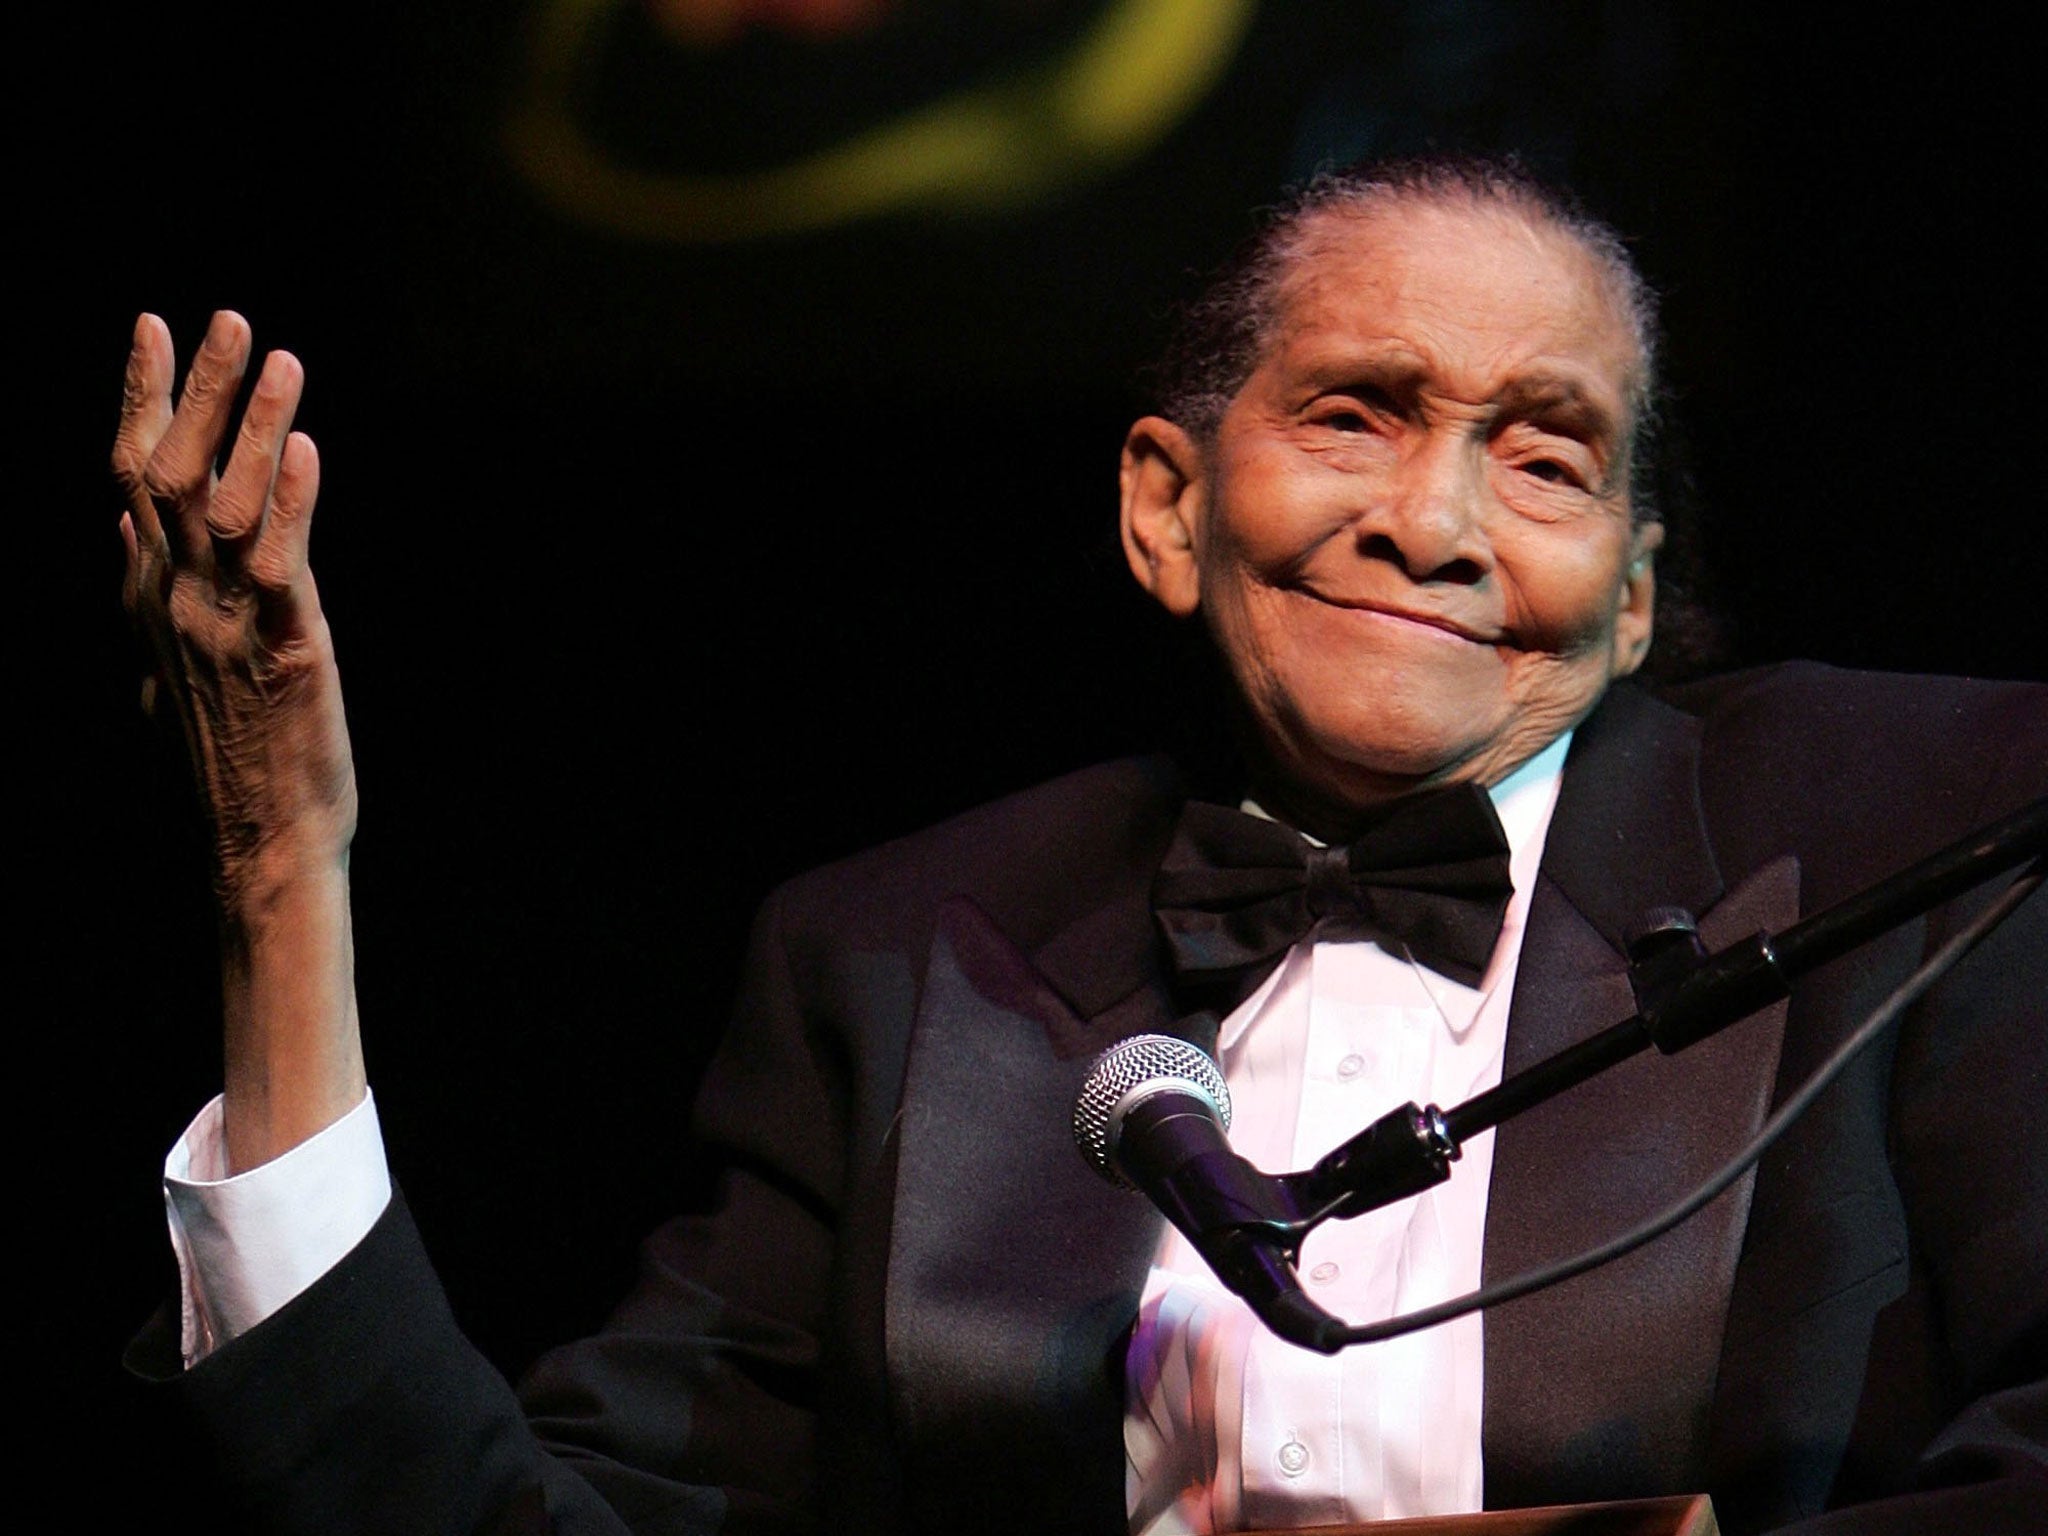 Jimmy Scott speaks after accepting a NEA Jazz Master award during the 17th Annual NEA Jazz Masters awards and concert on 12 January, 2007, in New York City